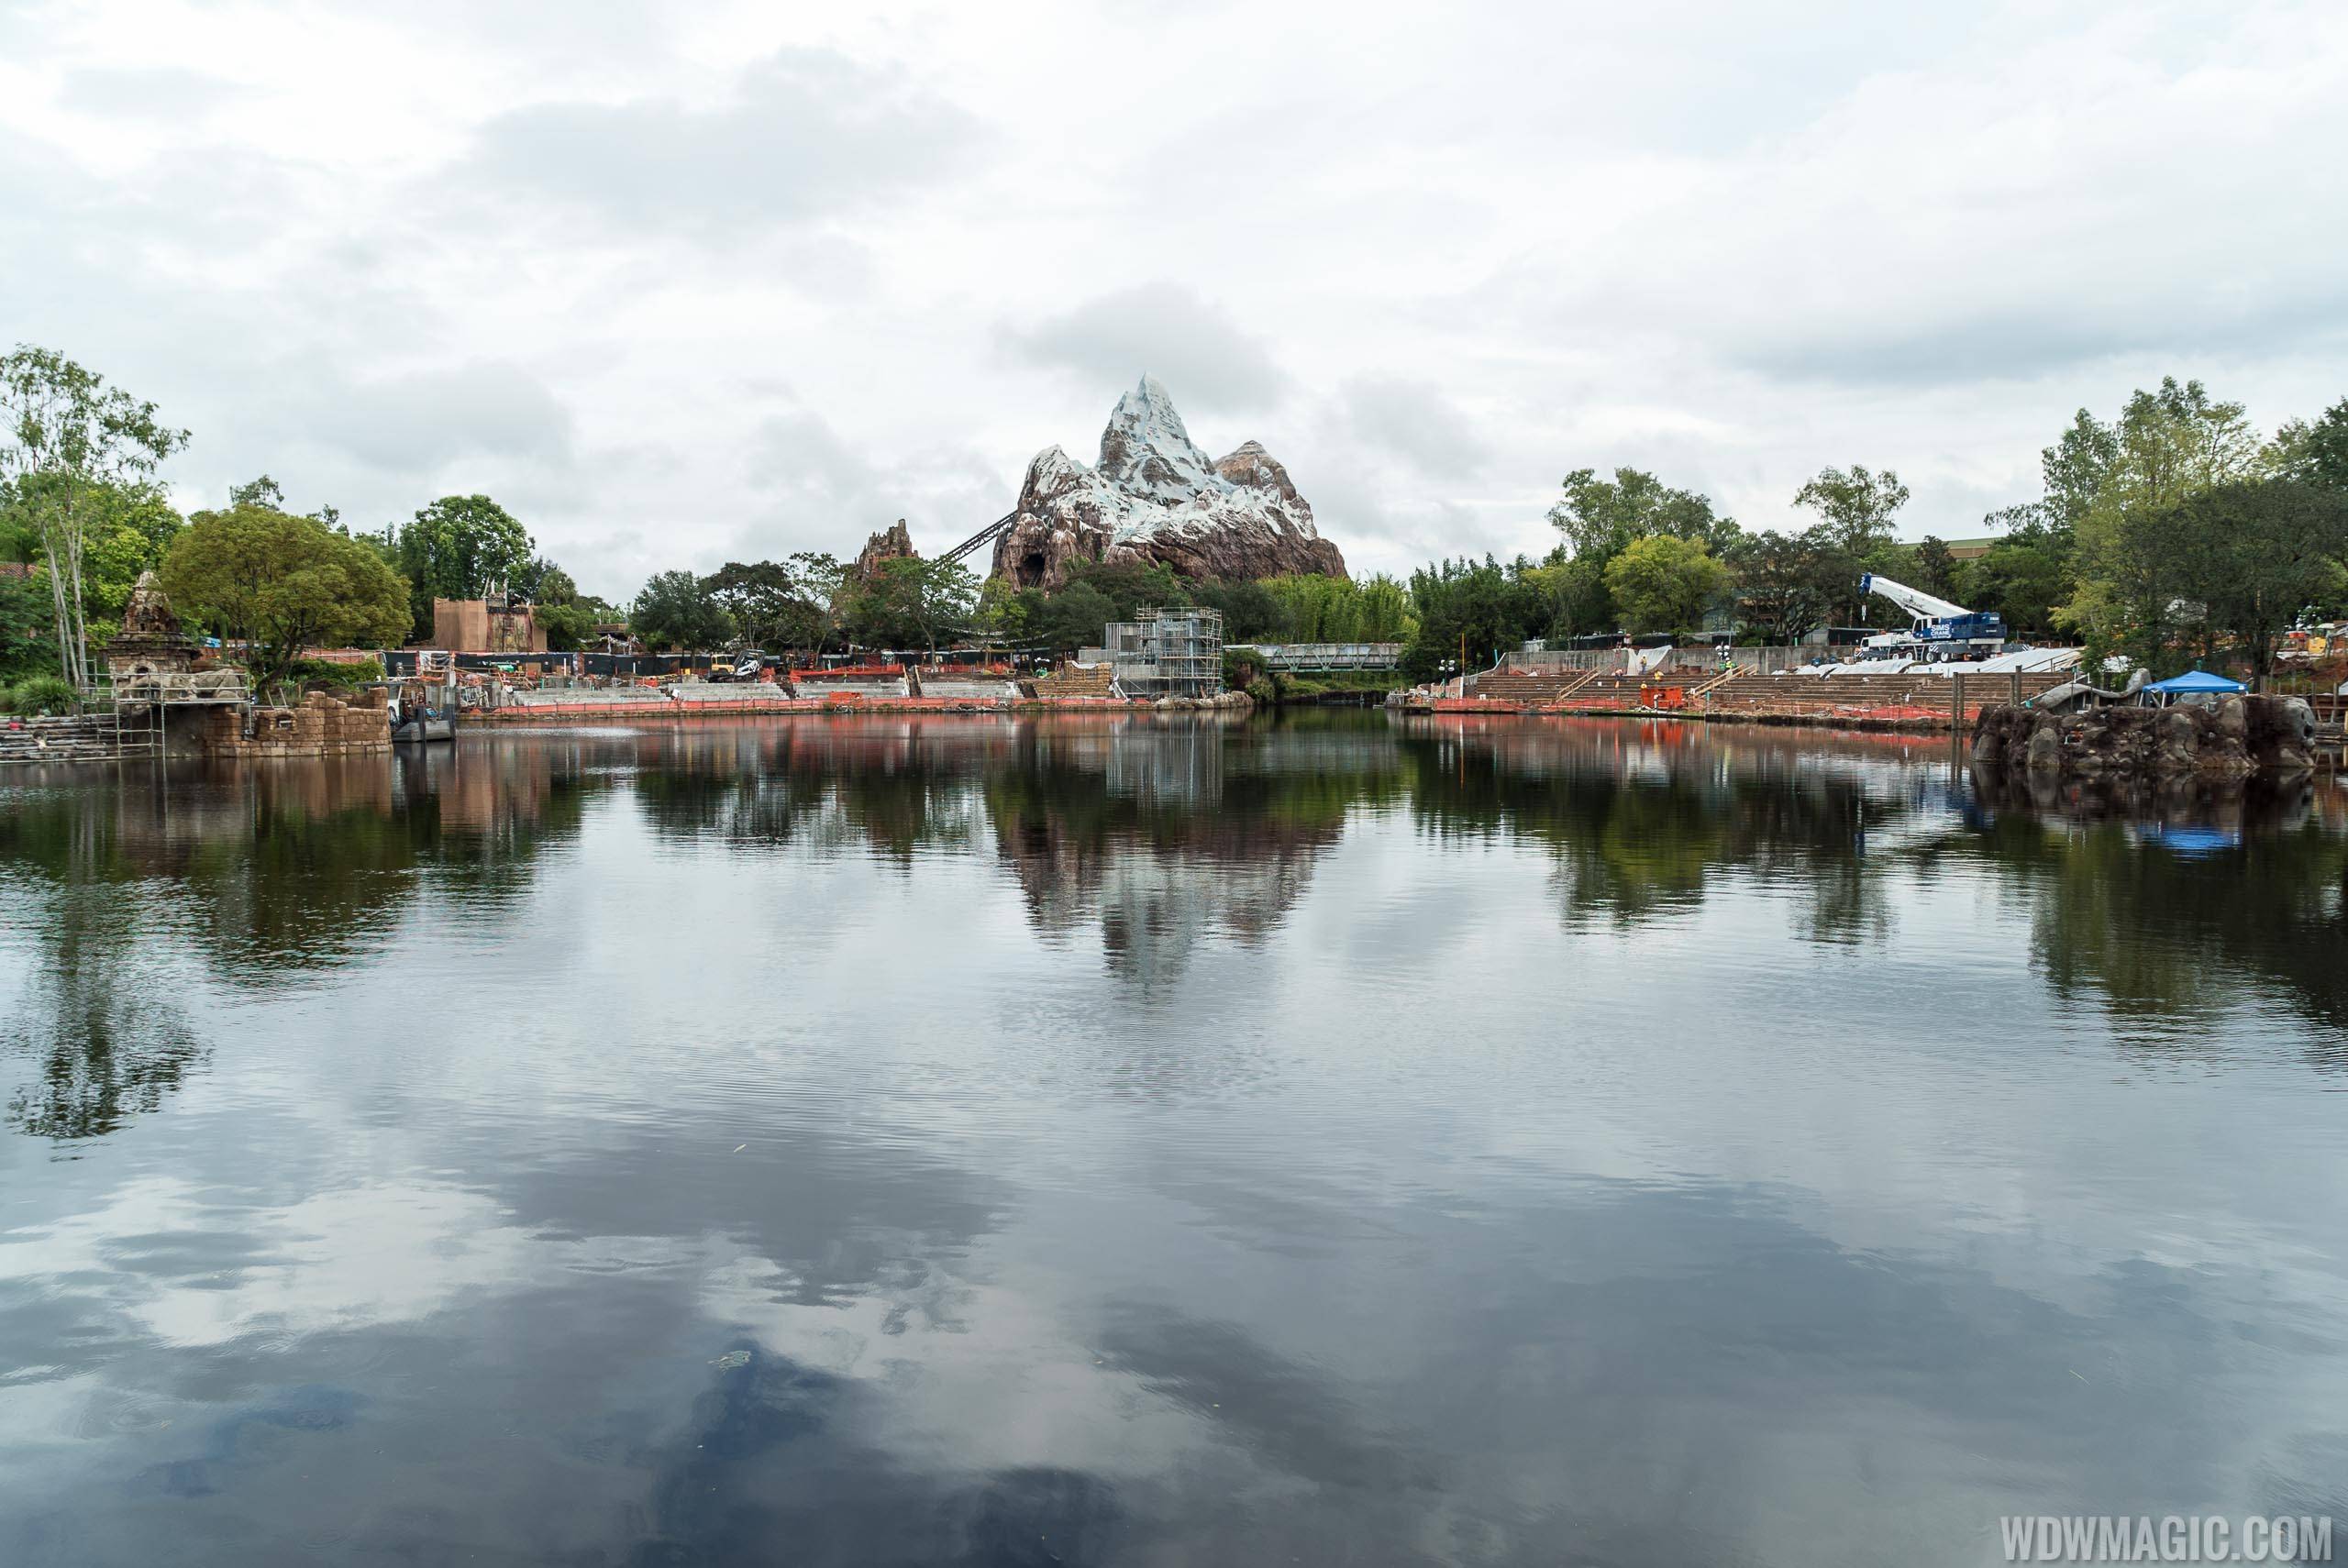 PHOTOS - Latest look at Rivers of Light construction at Disney's Animal Kingdom